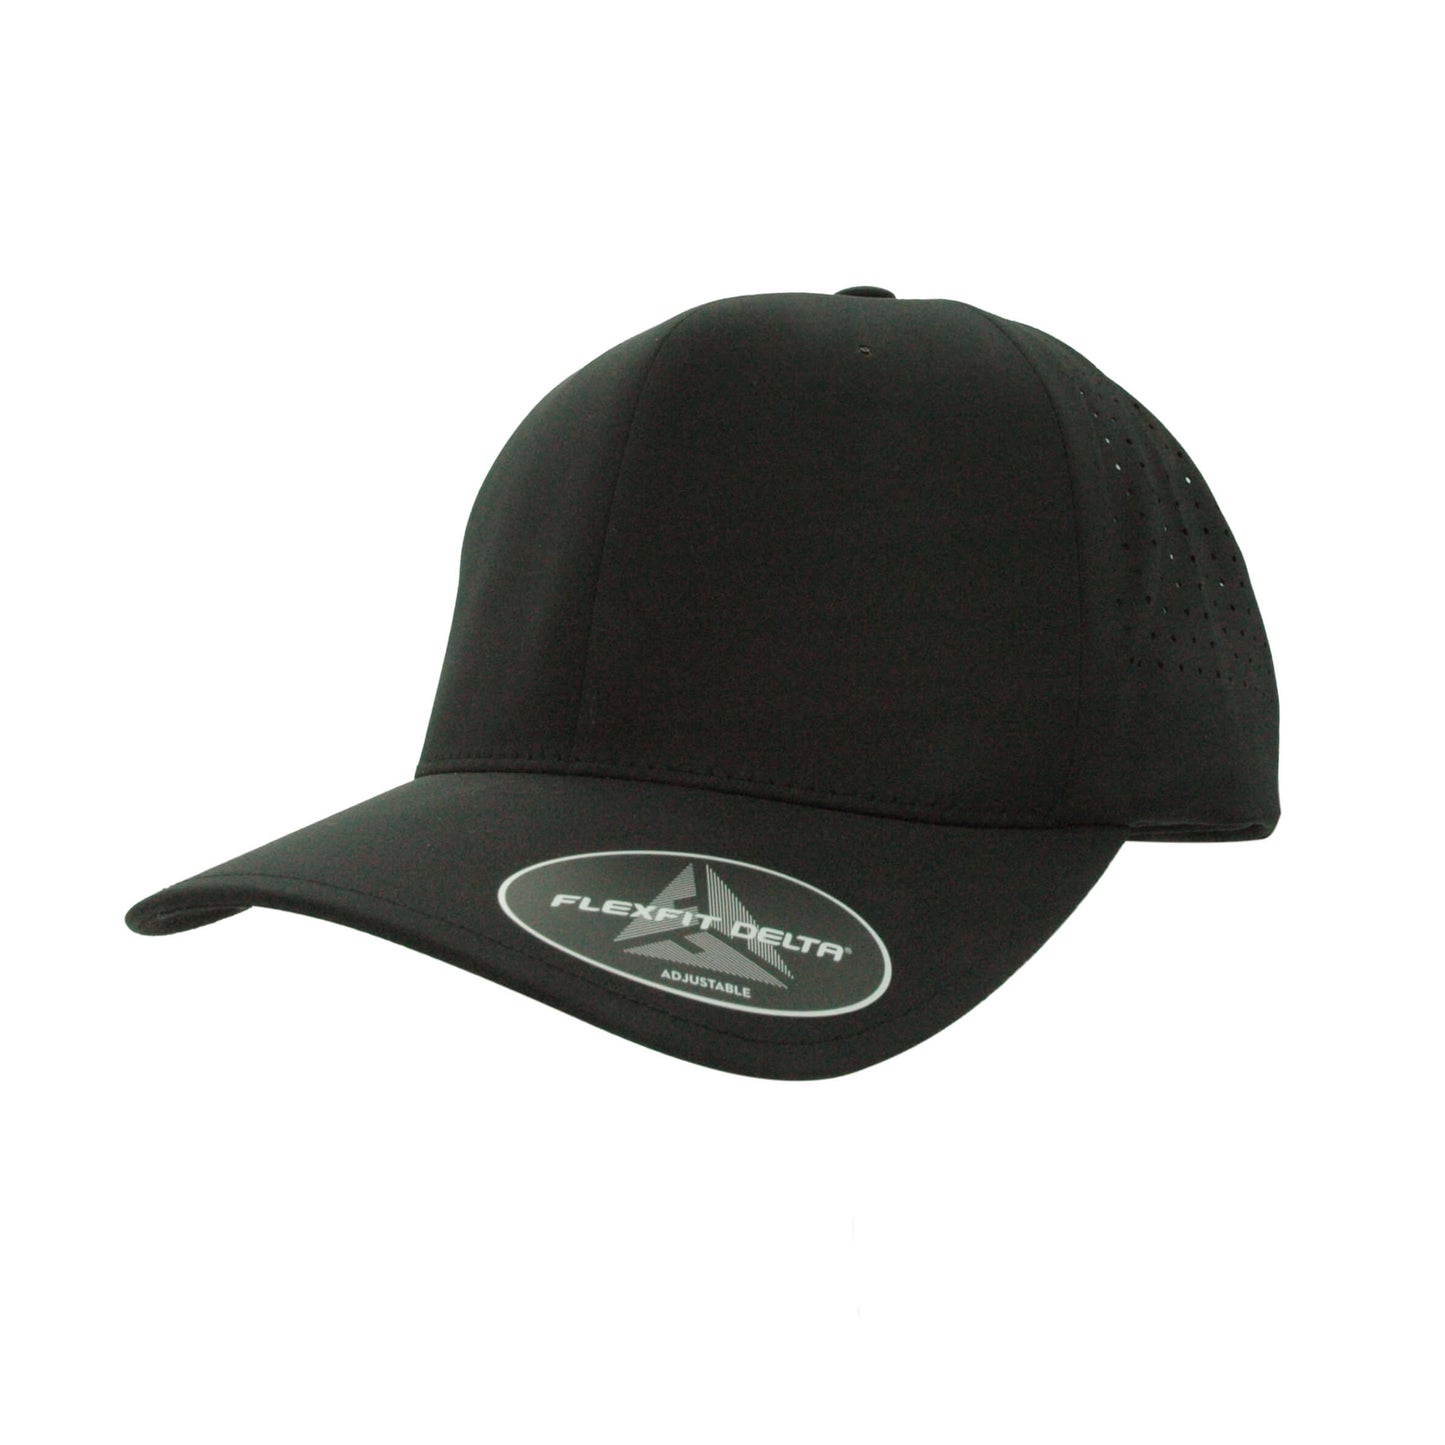 Delta Black Curve Peak Cap made with Perforated Technology  with an added Adjustable Buckle Clip